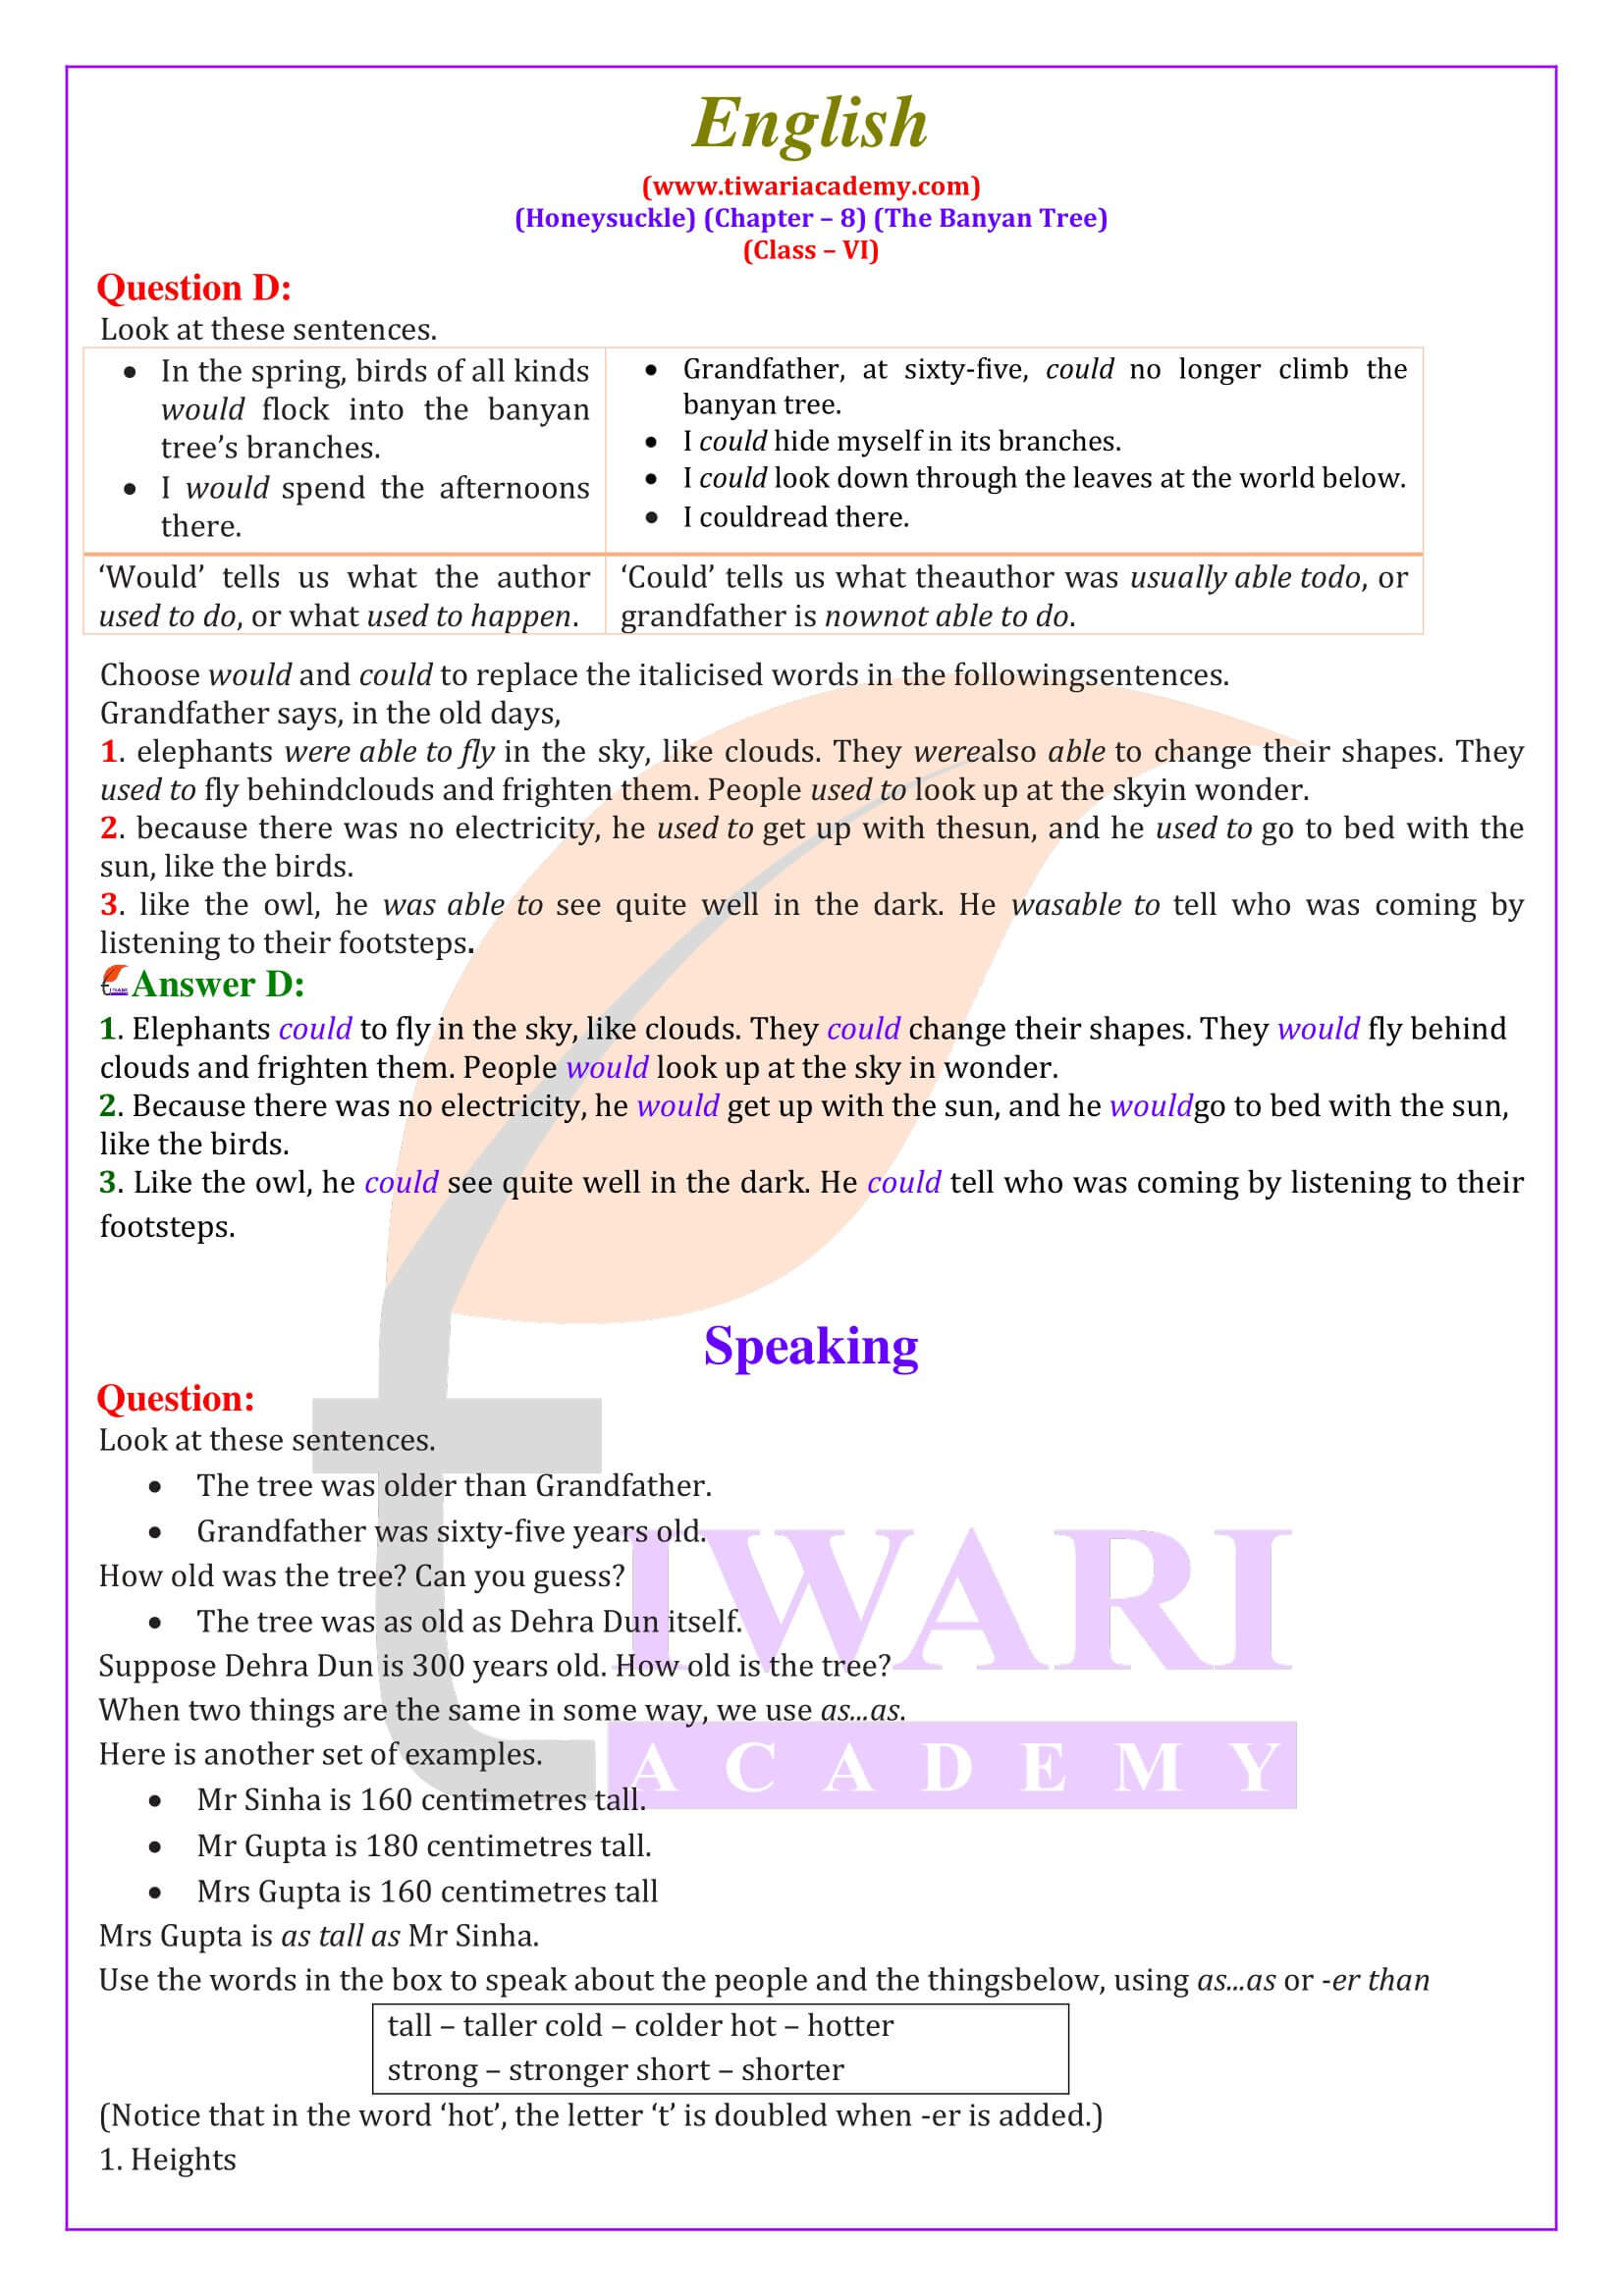 NCERT Solutions for Class 6 English Honeysuckle Chapter 8 Exercises